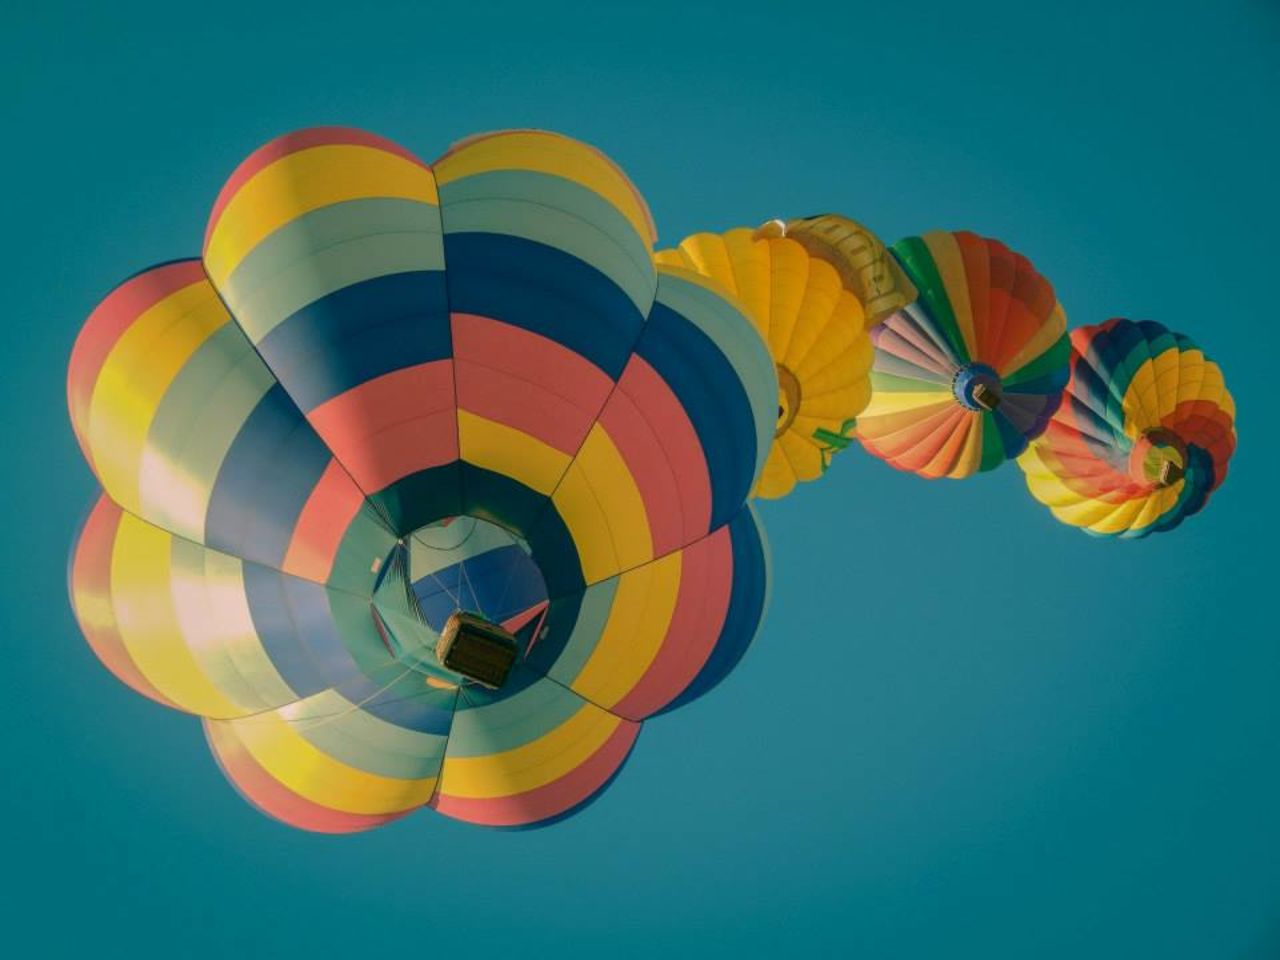 Never mind Reno's gambling: The Great Reno (Nevada) Balloon Race is a free event for the whole family in September.